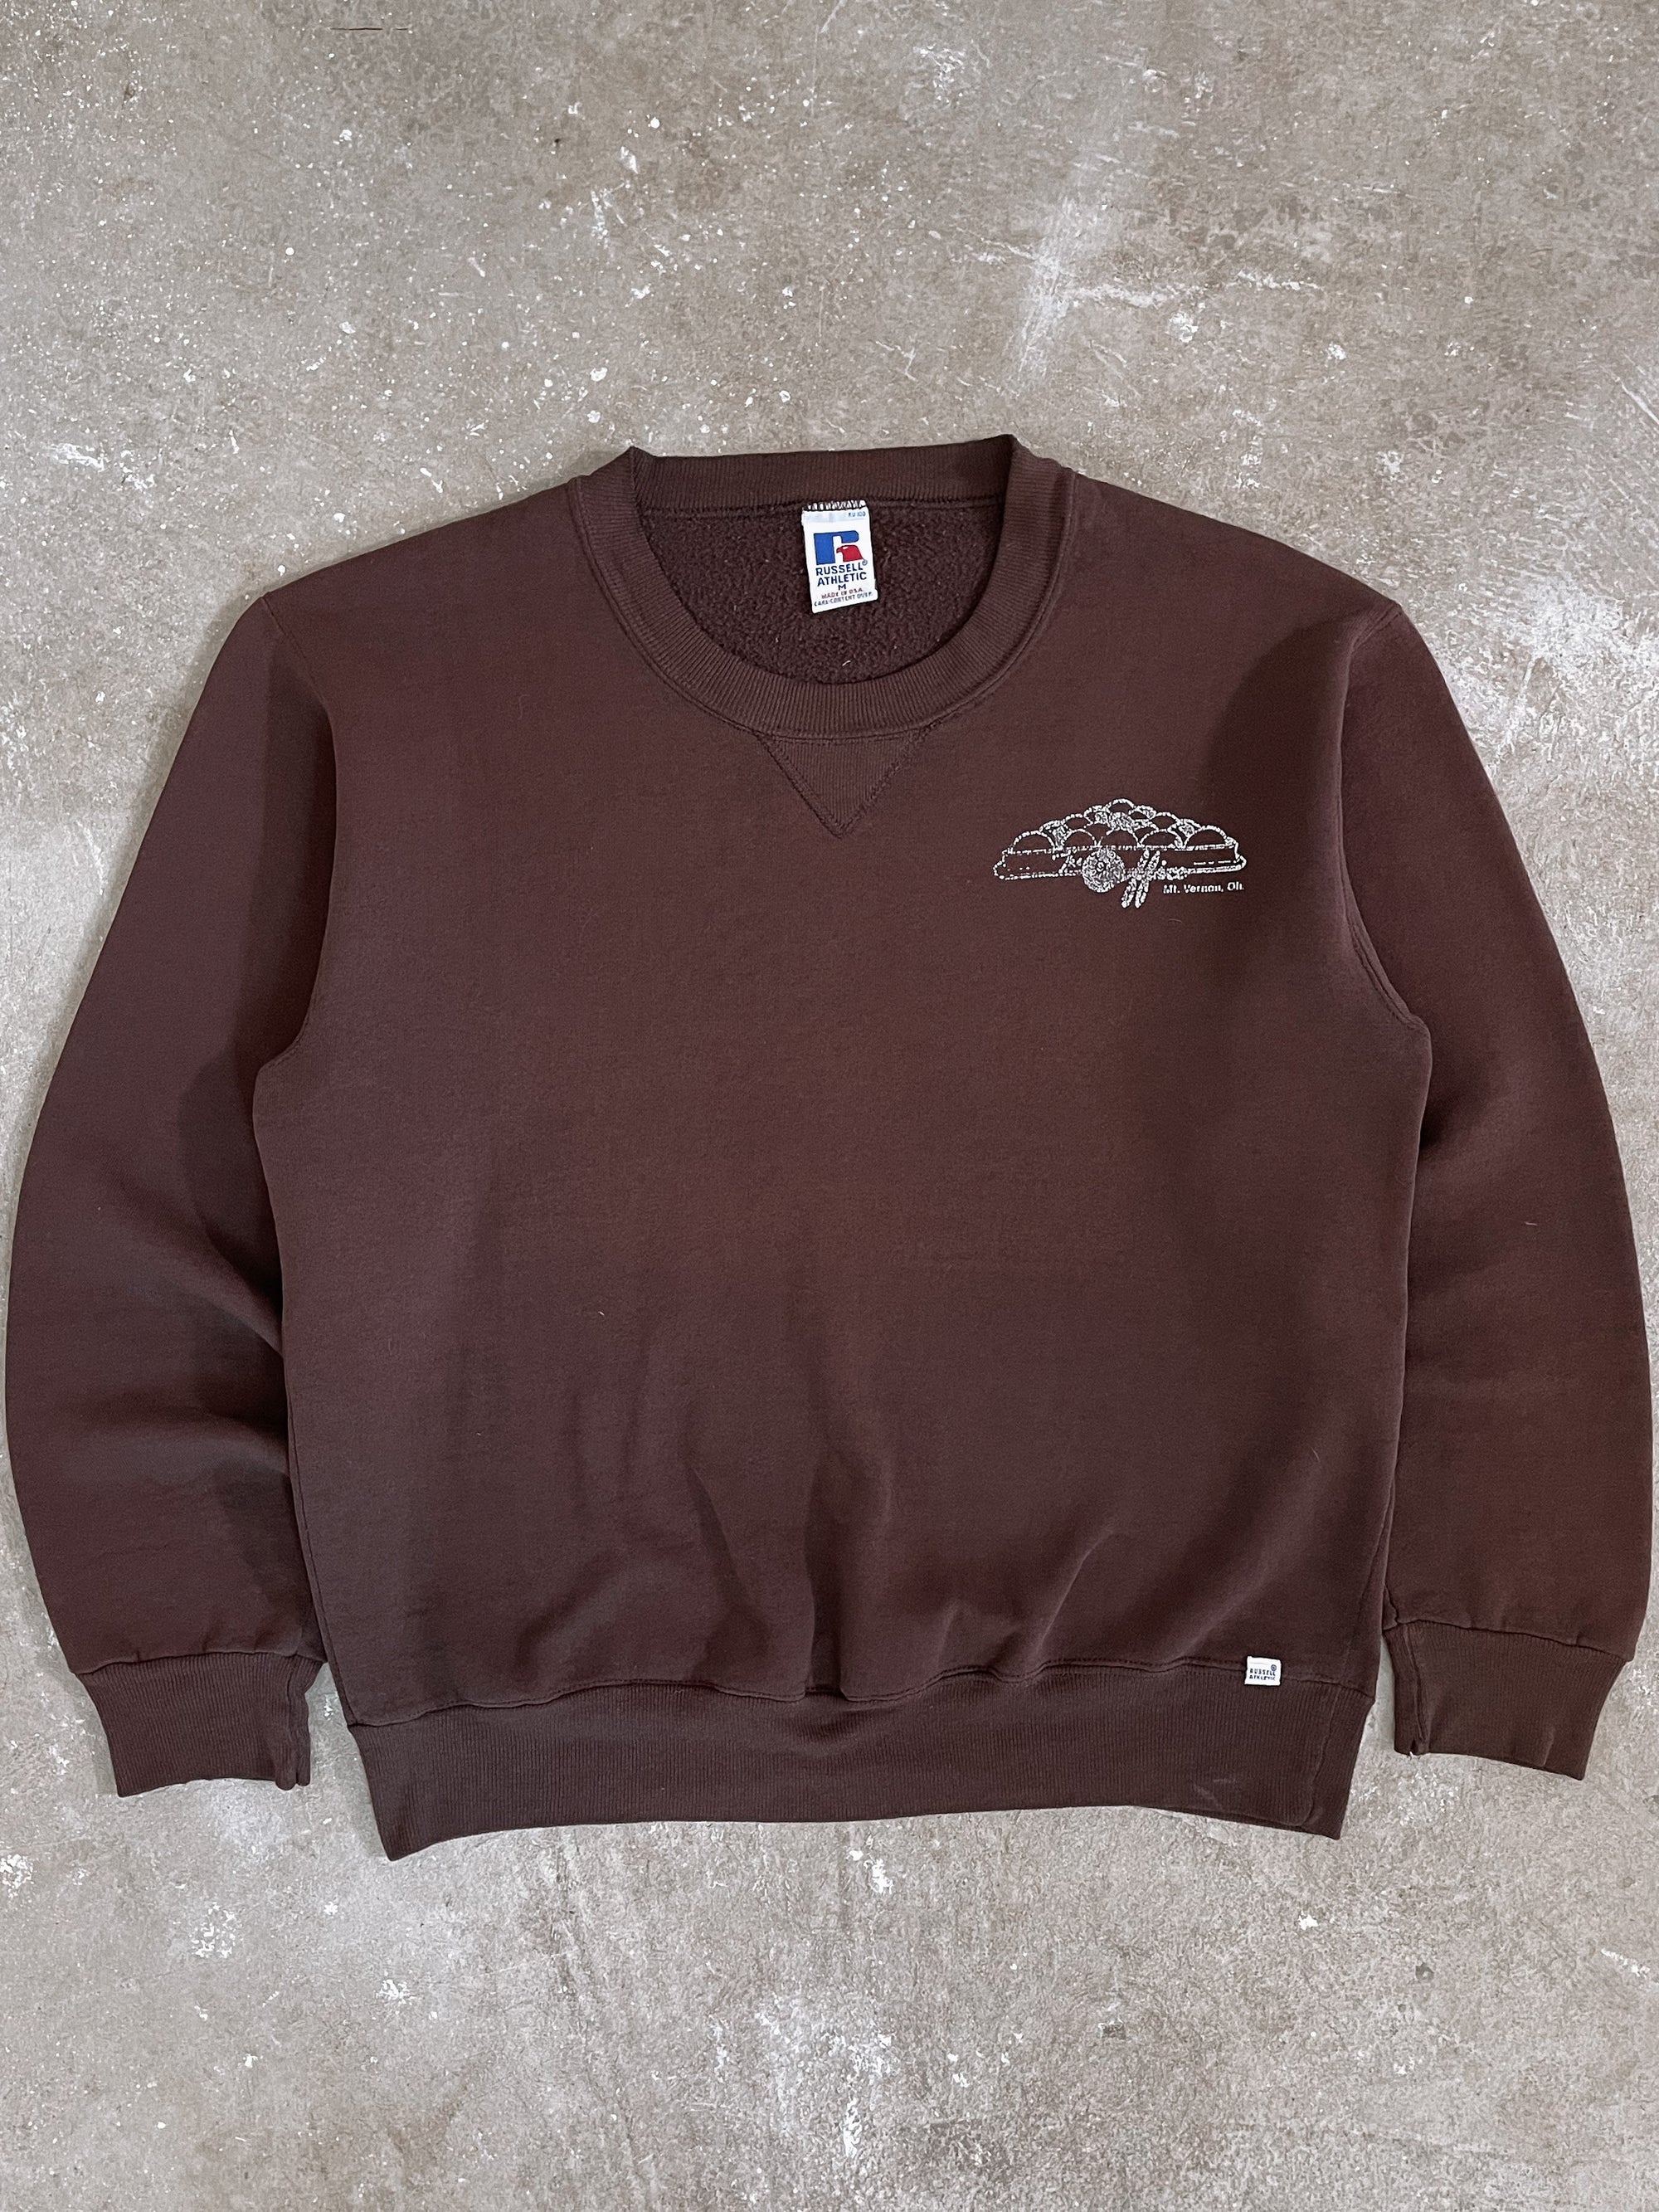 1990s Russell “The Office” Brown Sweatshirt (M)